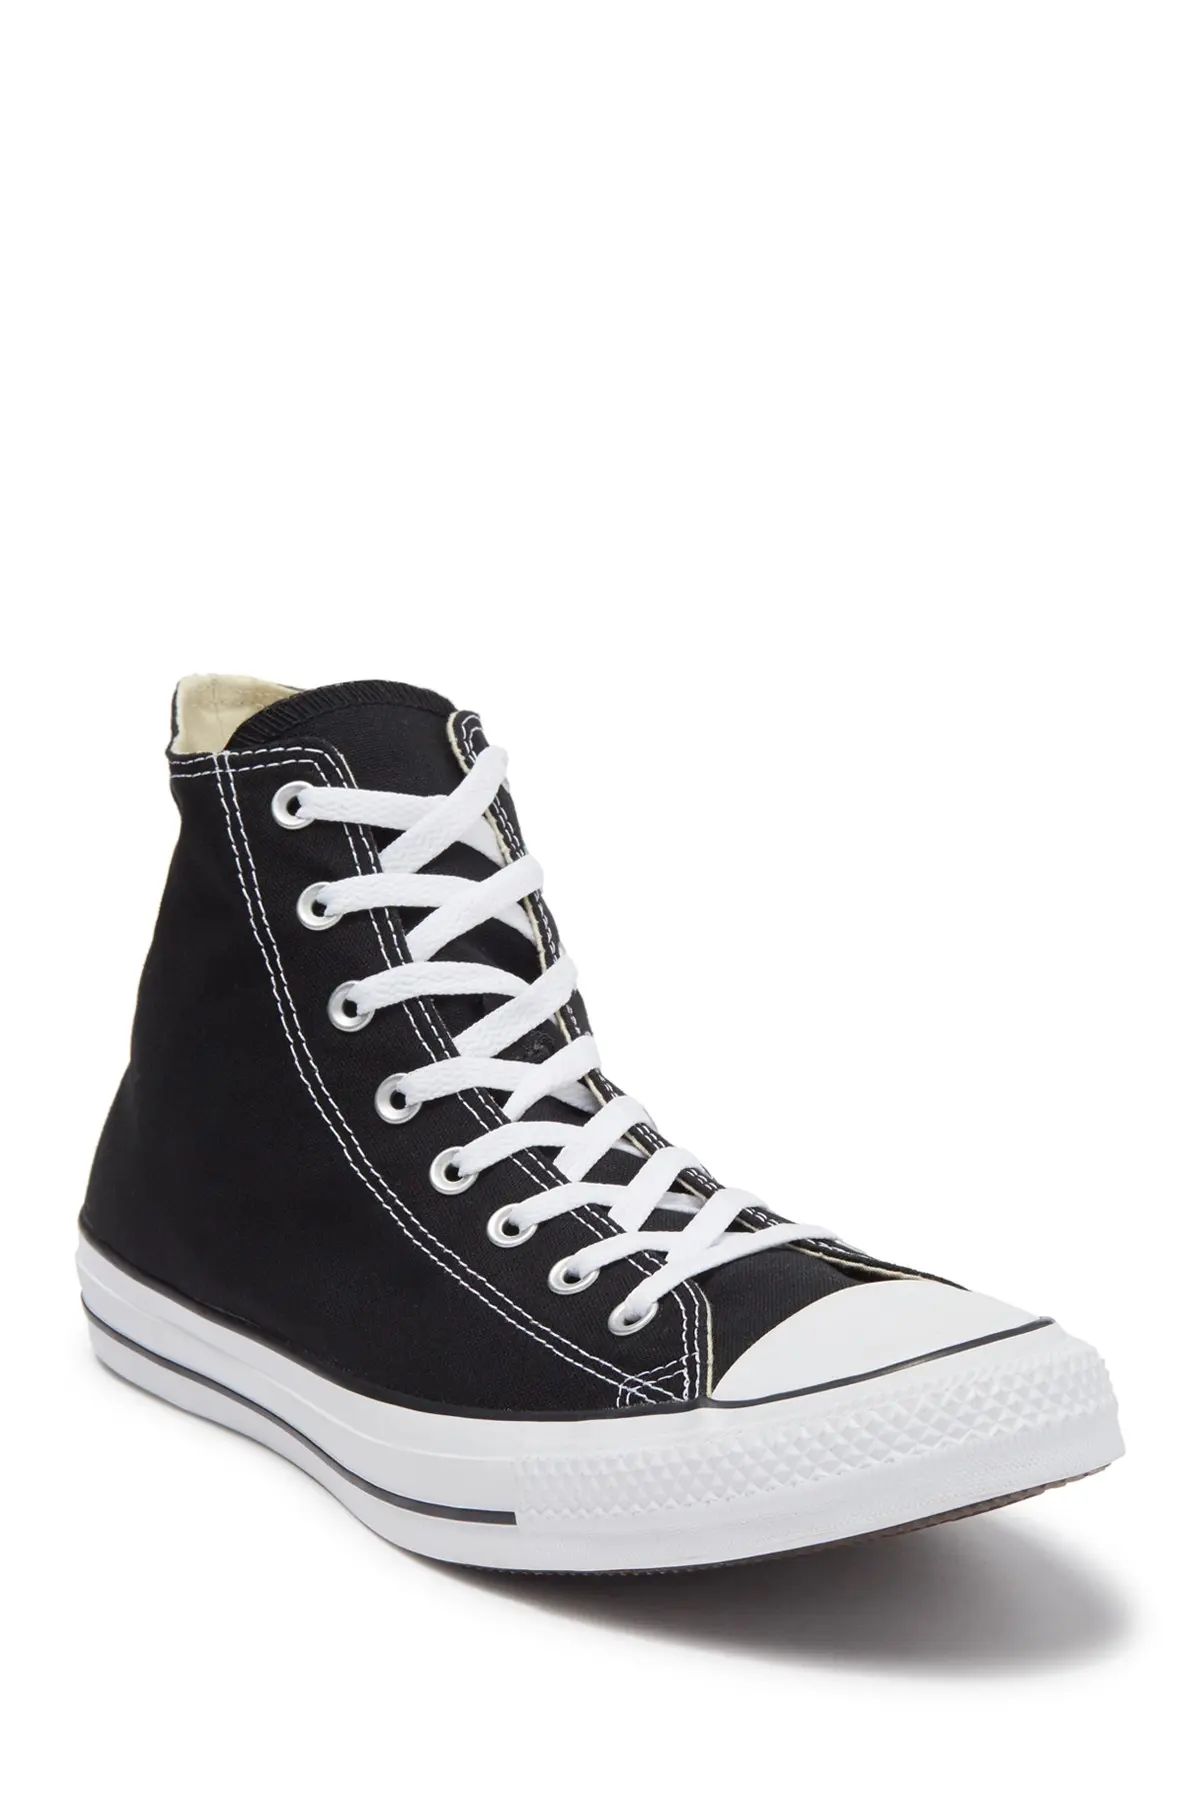 Converse Chuck Taylor(R) All Star(R) High Top Sneaker in Black at Nordstrom, Size 11.5 Women's | Nordstrom